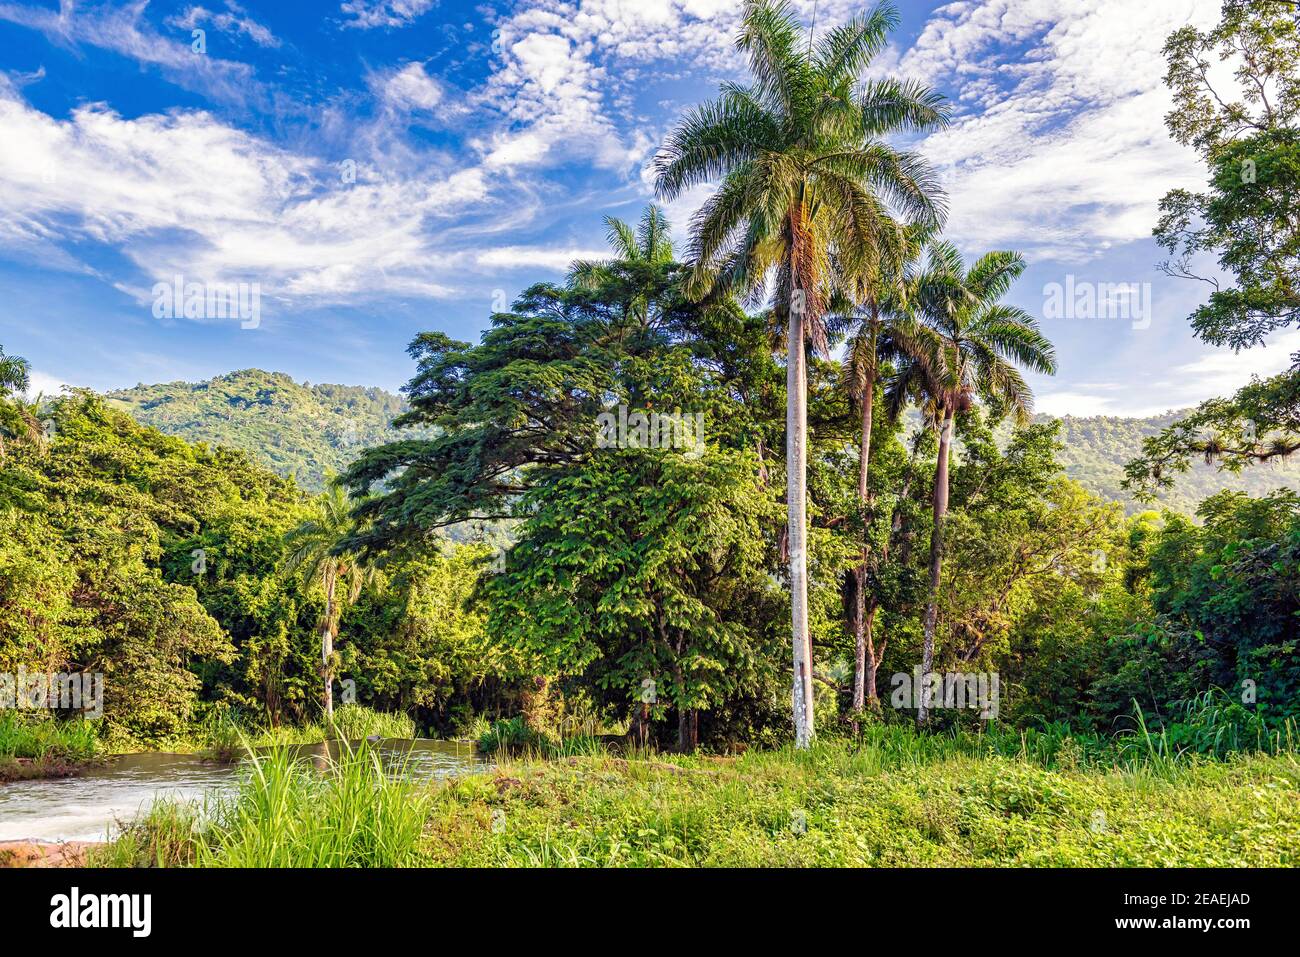 Beautiful countryside in a tropical country during summertime, exuberant green vegetation, and amazing blue clear sky Stock Photo